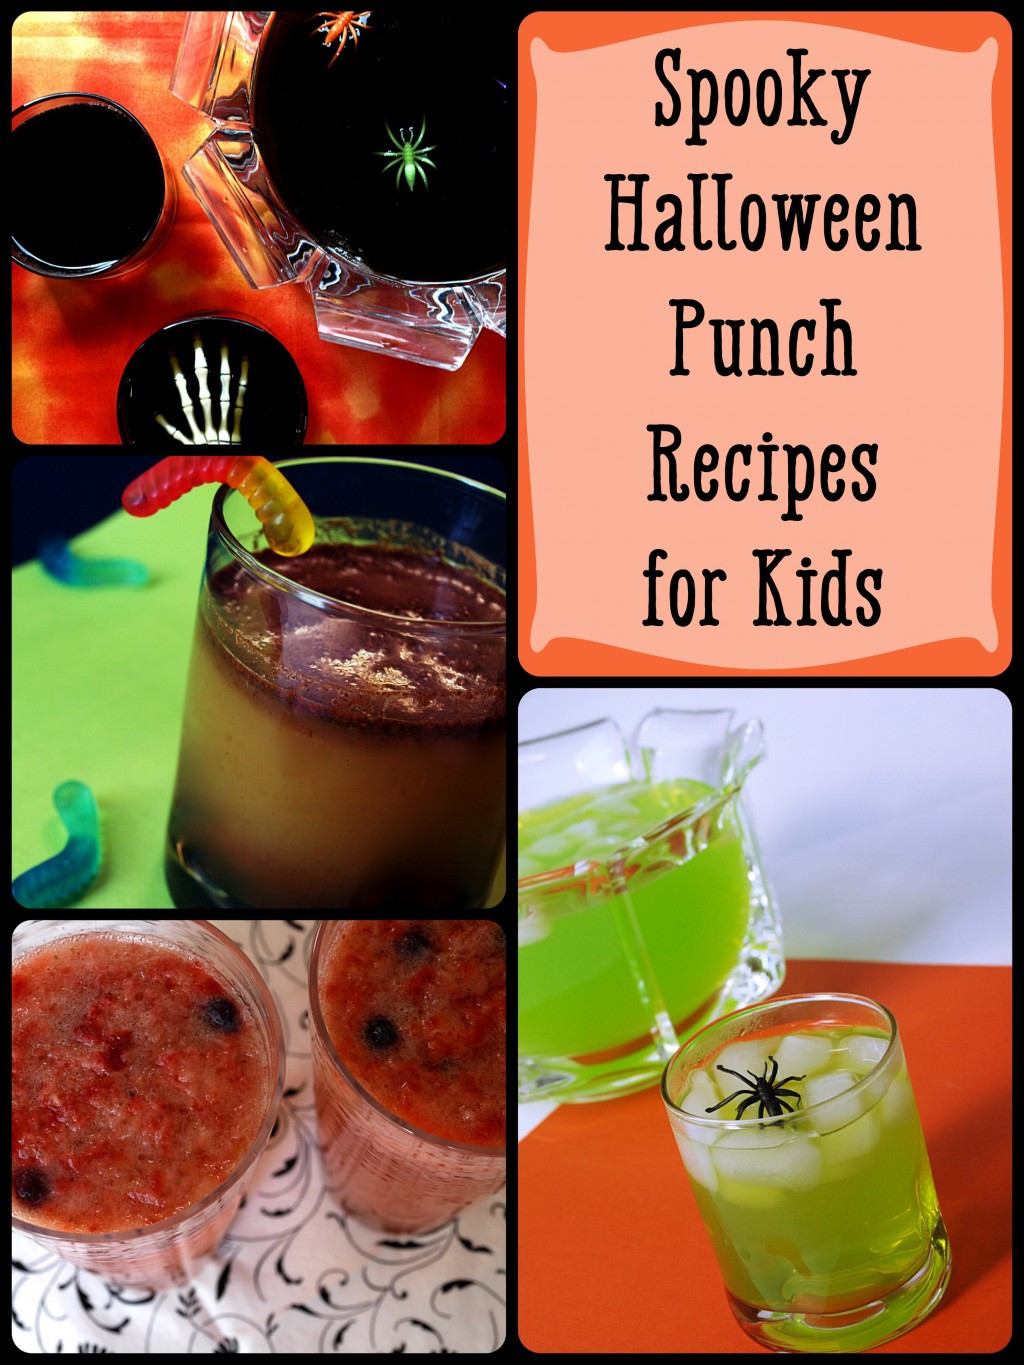 Halloween Party Punch Ideas
 Spooky Halloween Punch Recipes and Drink Ideas for Kids